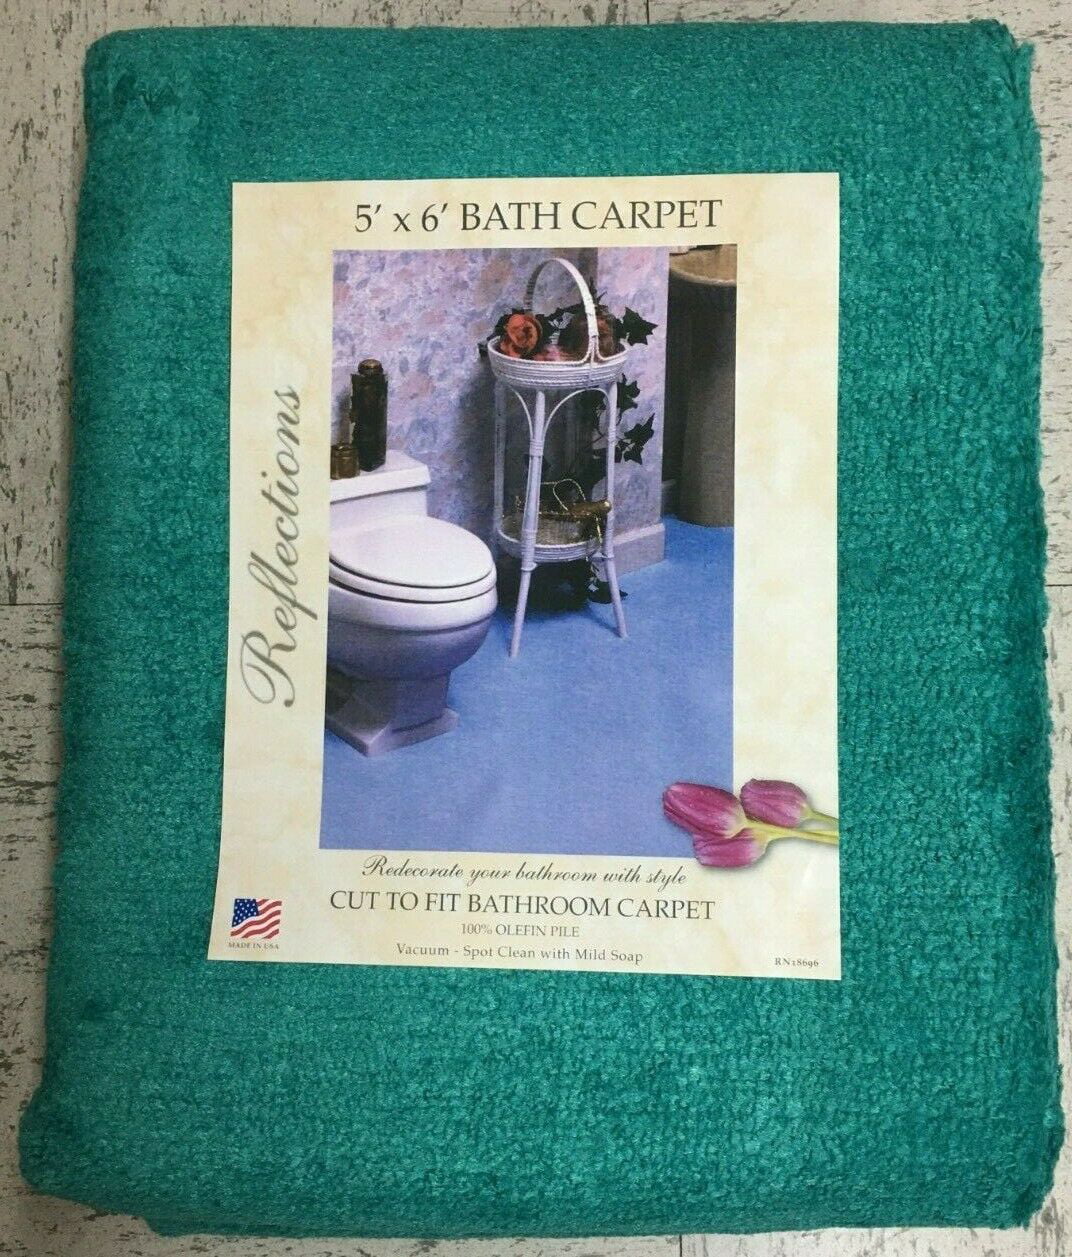 REFLECTIONS WALL TO WALL BATHROOM CARPET, CUT TO FIT, 5' X